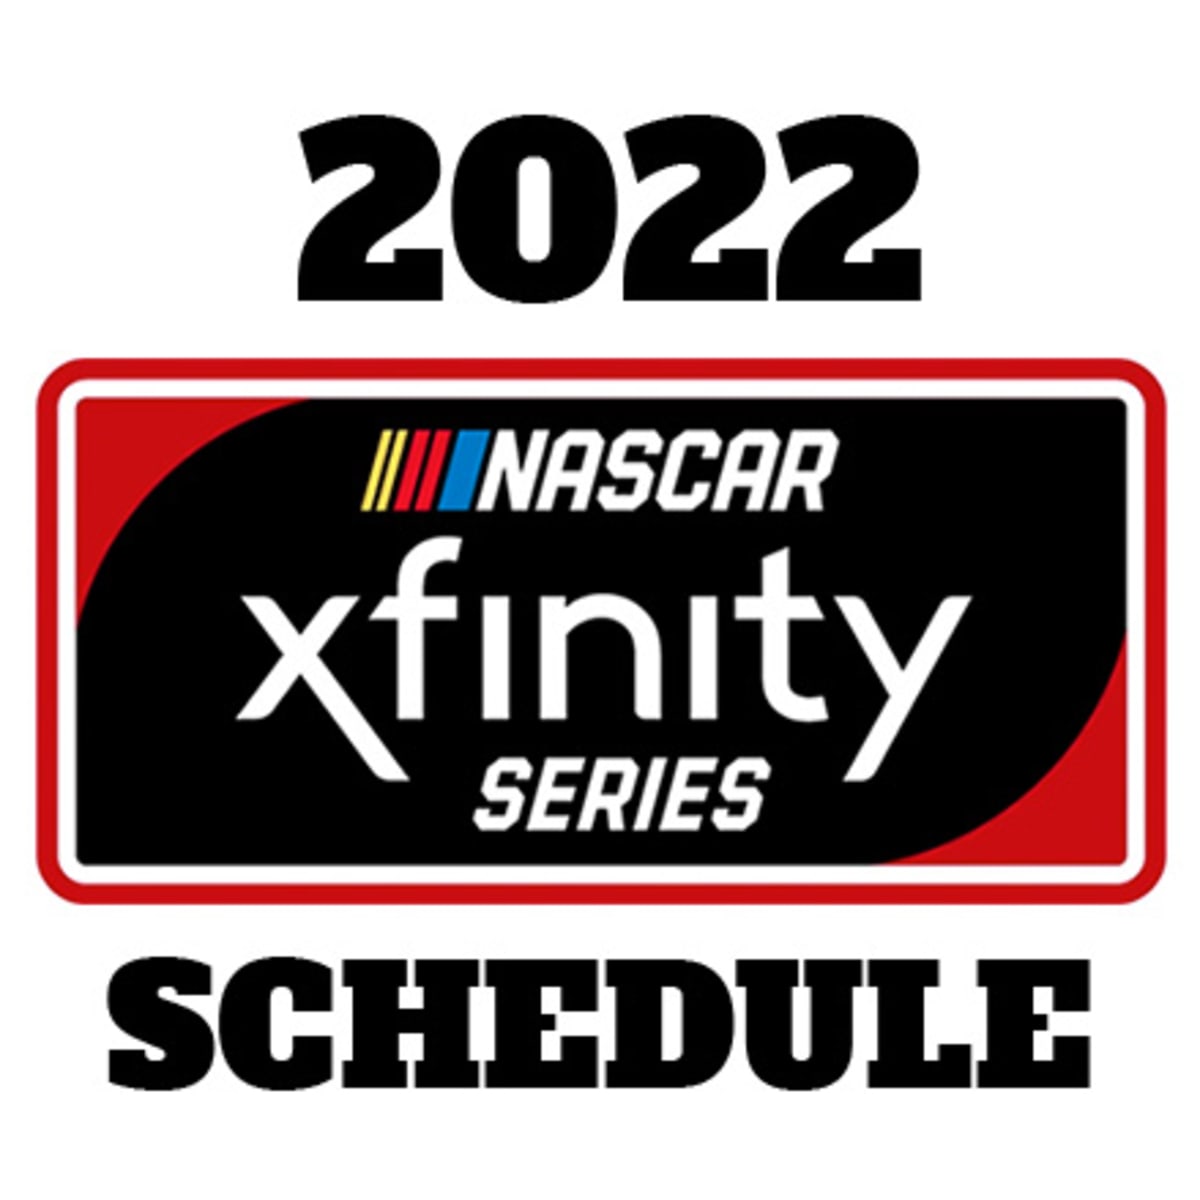 Nascar Schedule 2022 Texas 2022 Nascar Xfinity Series Schedule - Athlonsports.com | Expert  Predictions, Picks, And Previews